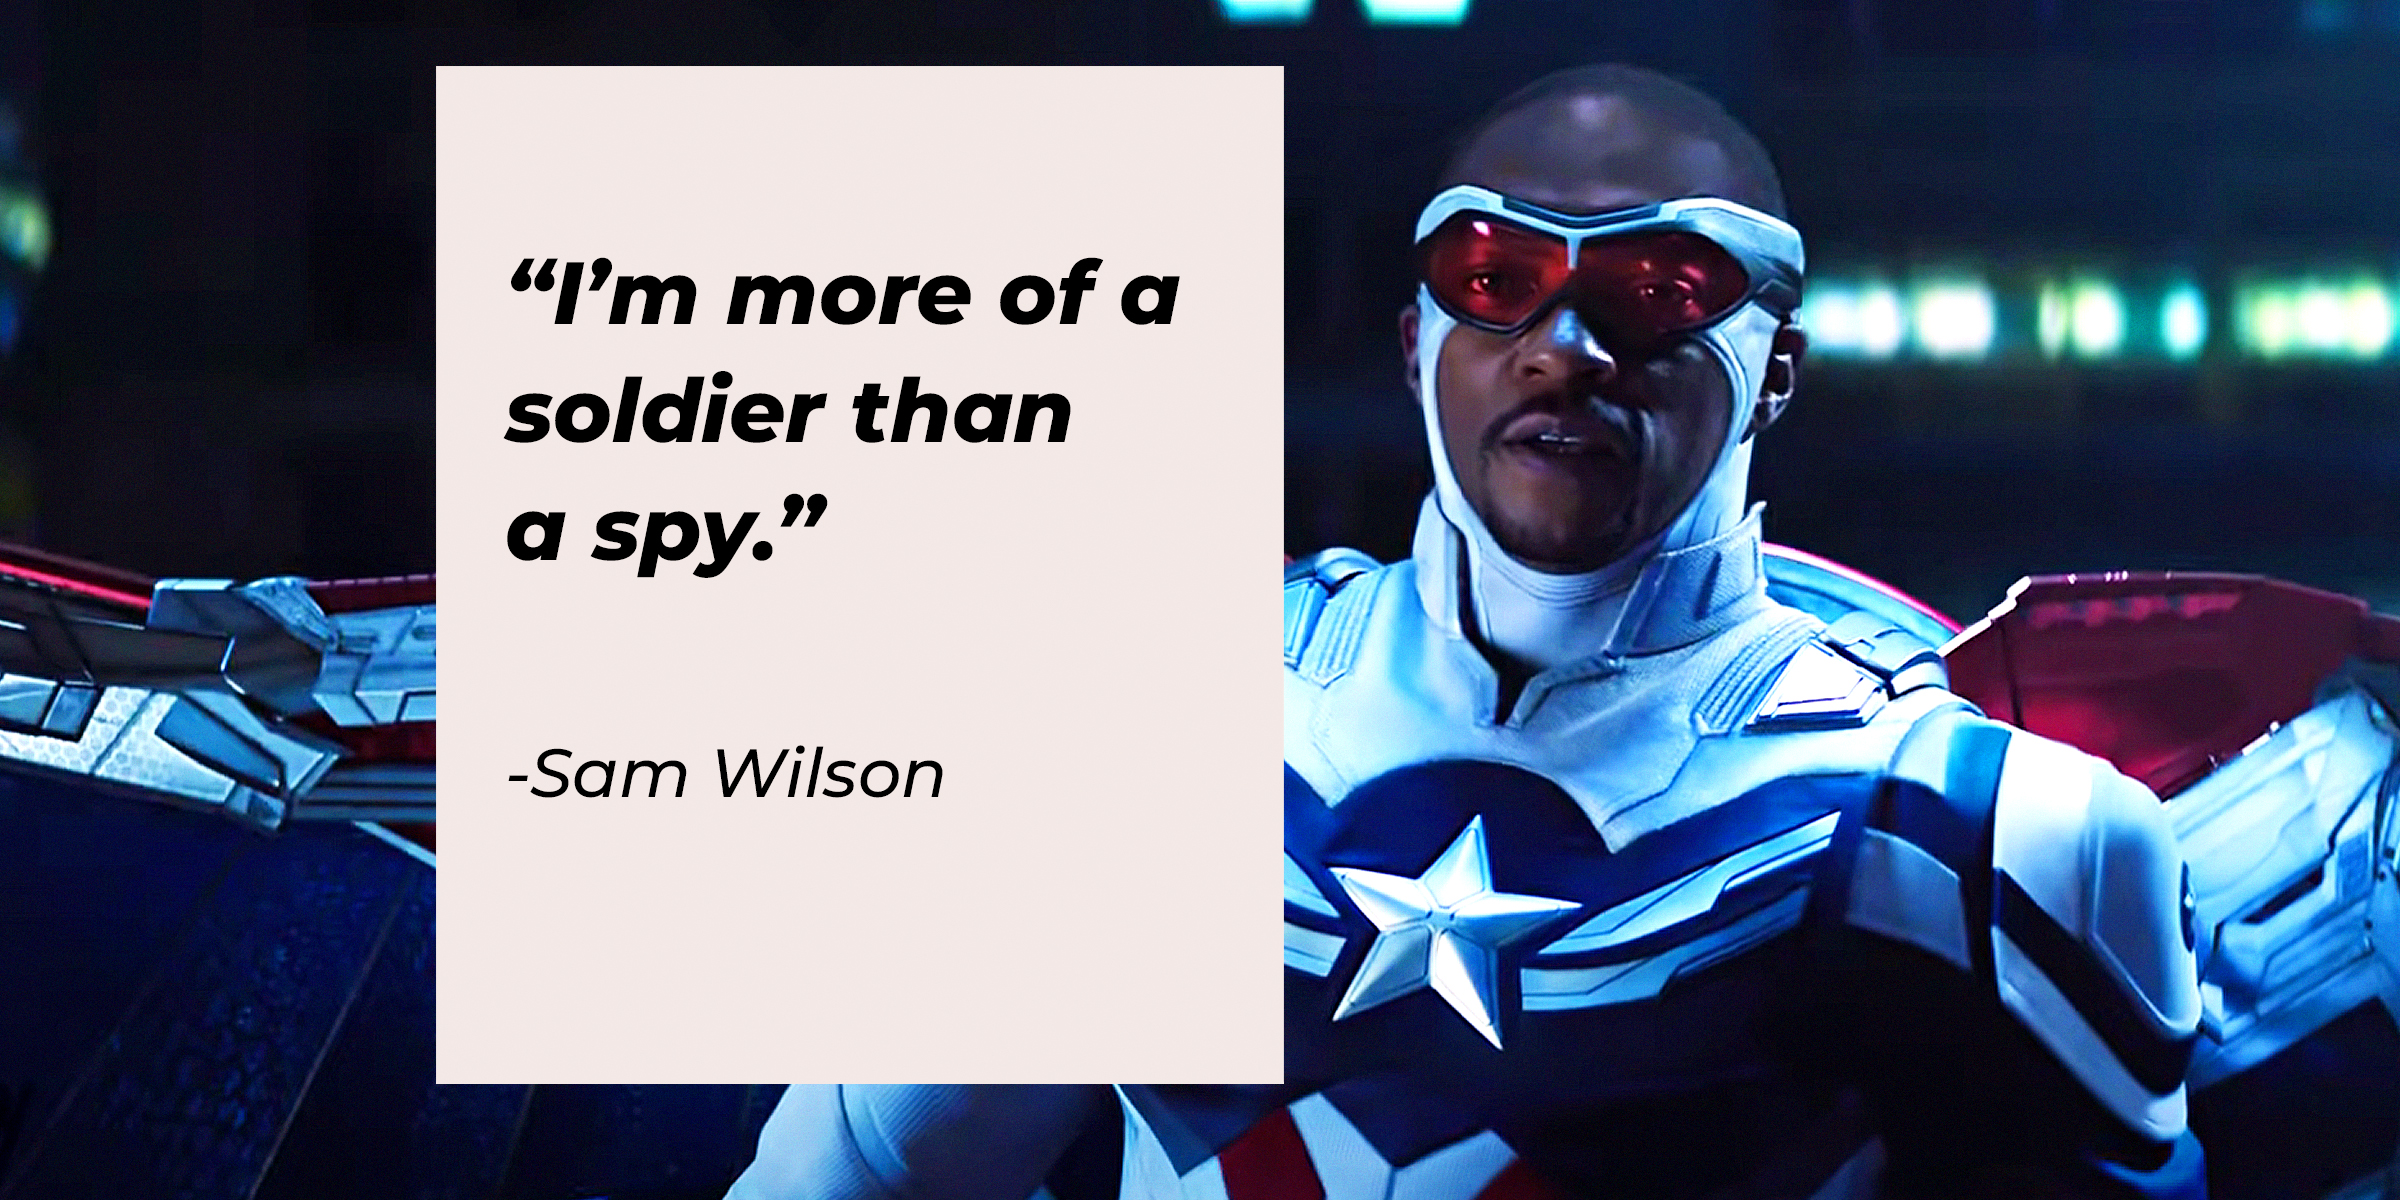 Sam Wilson, with his quote: "I’m more of a soldier than a spy." | Source: Youtube.com/marvel